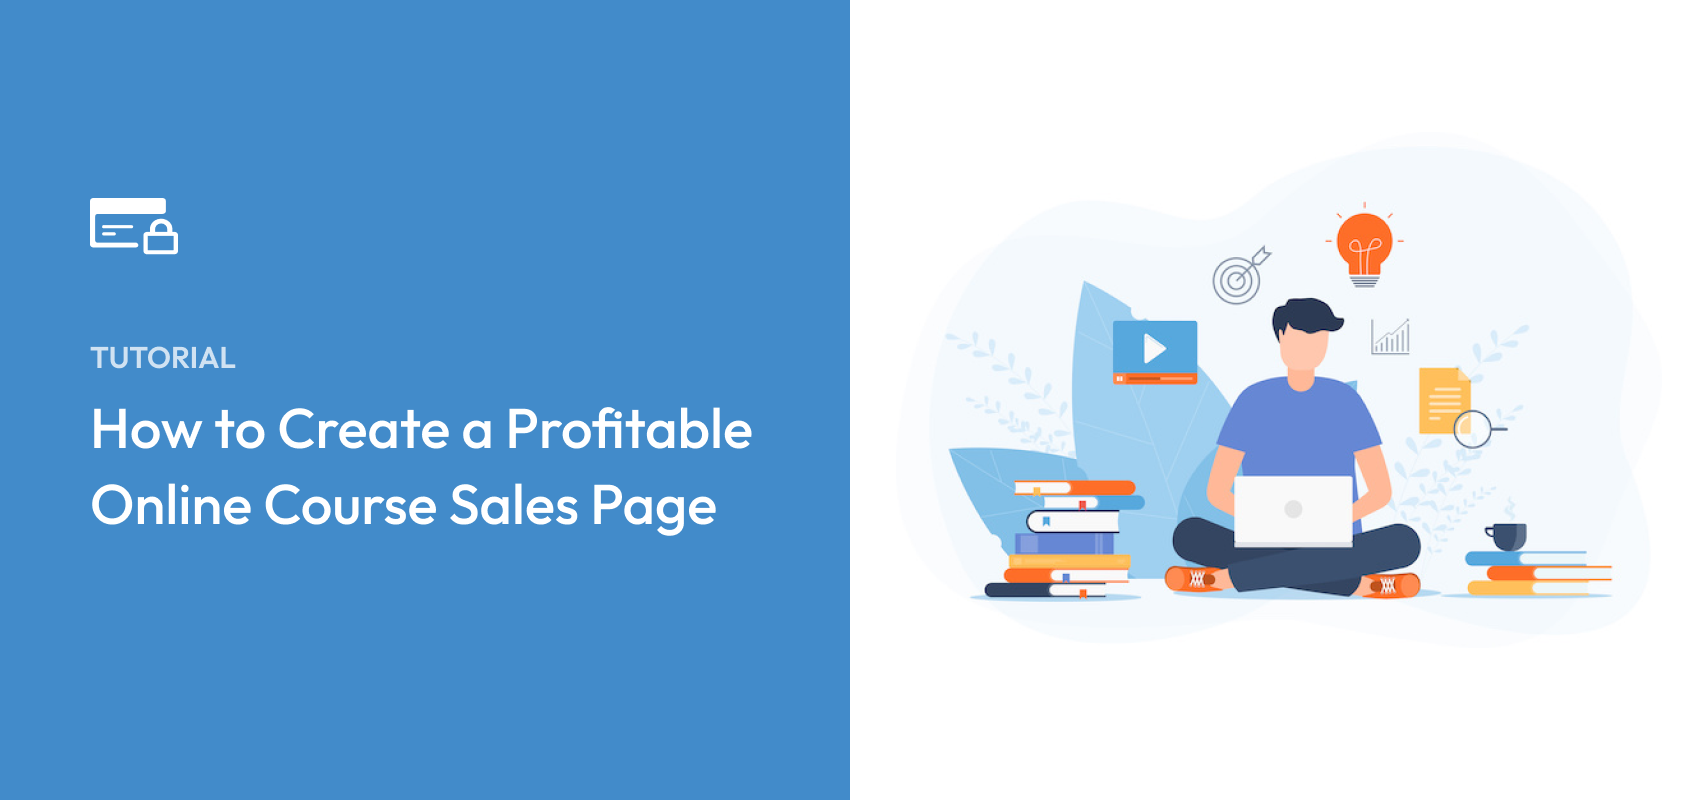 How to Create a Profitable Online Course Sales Page